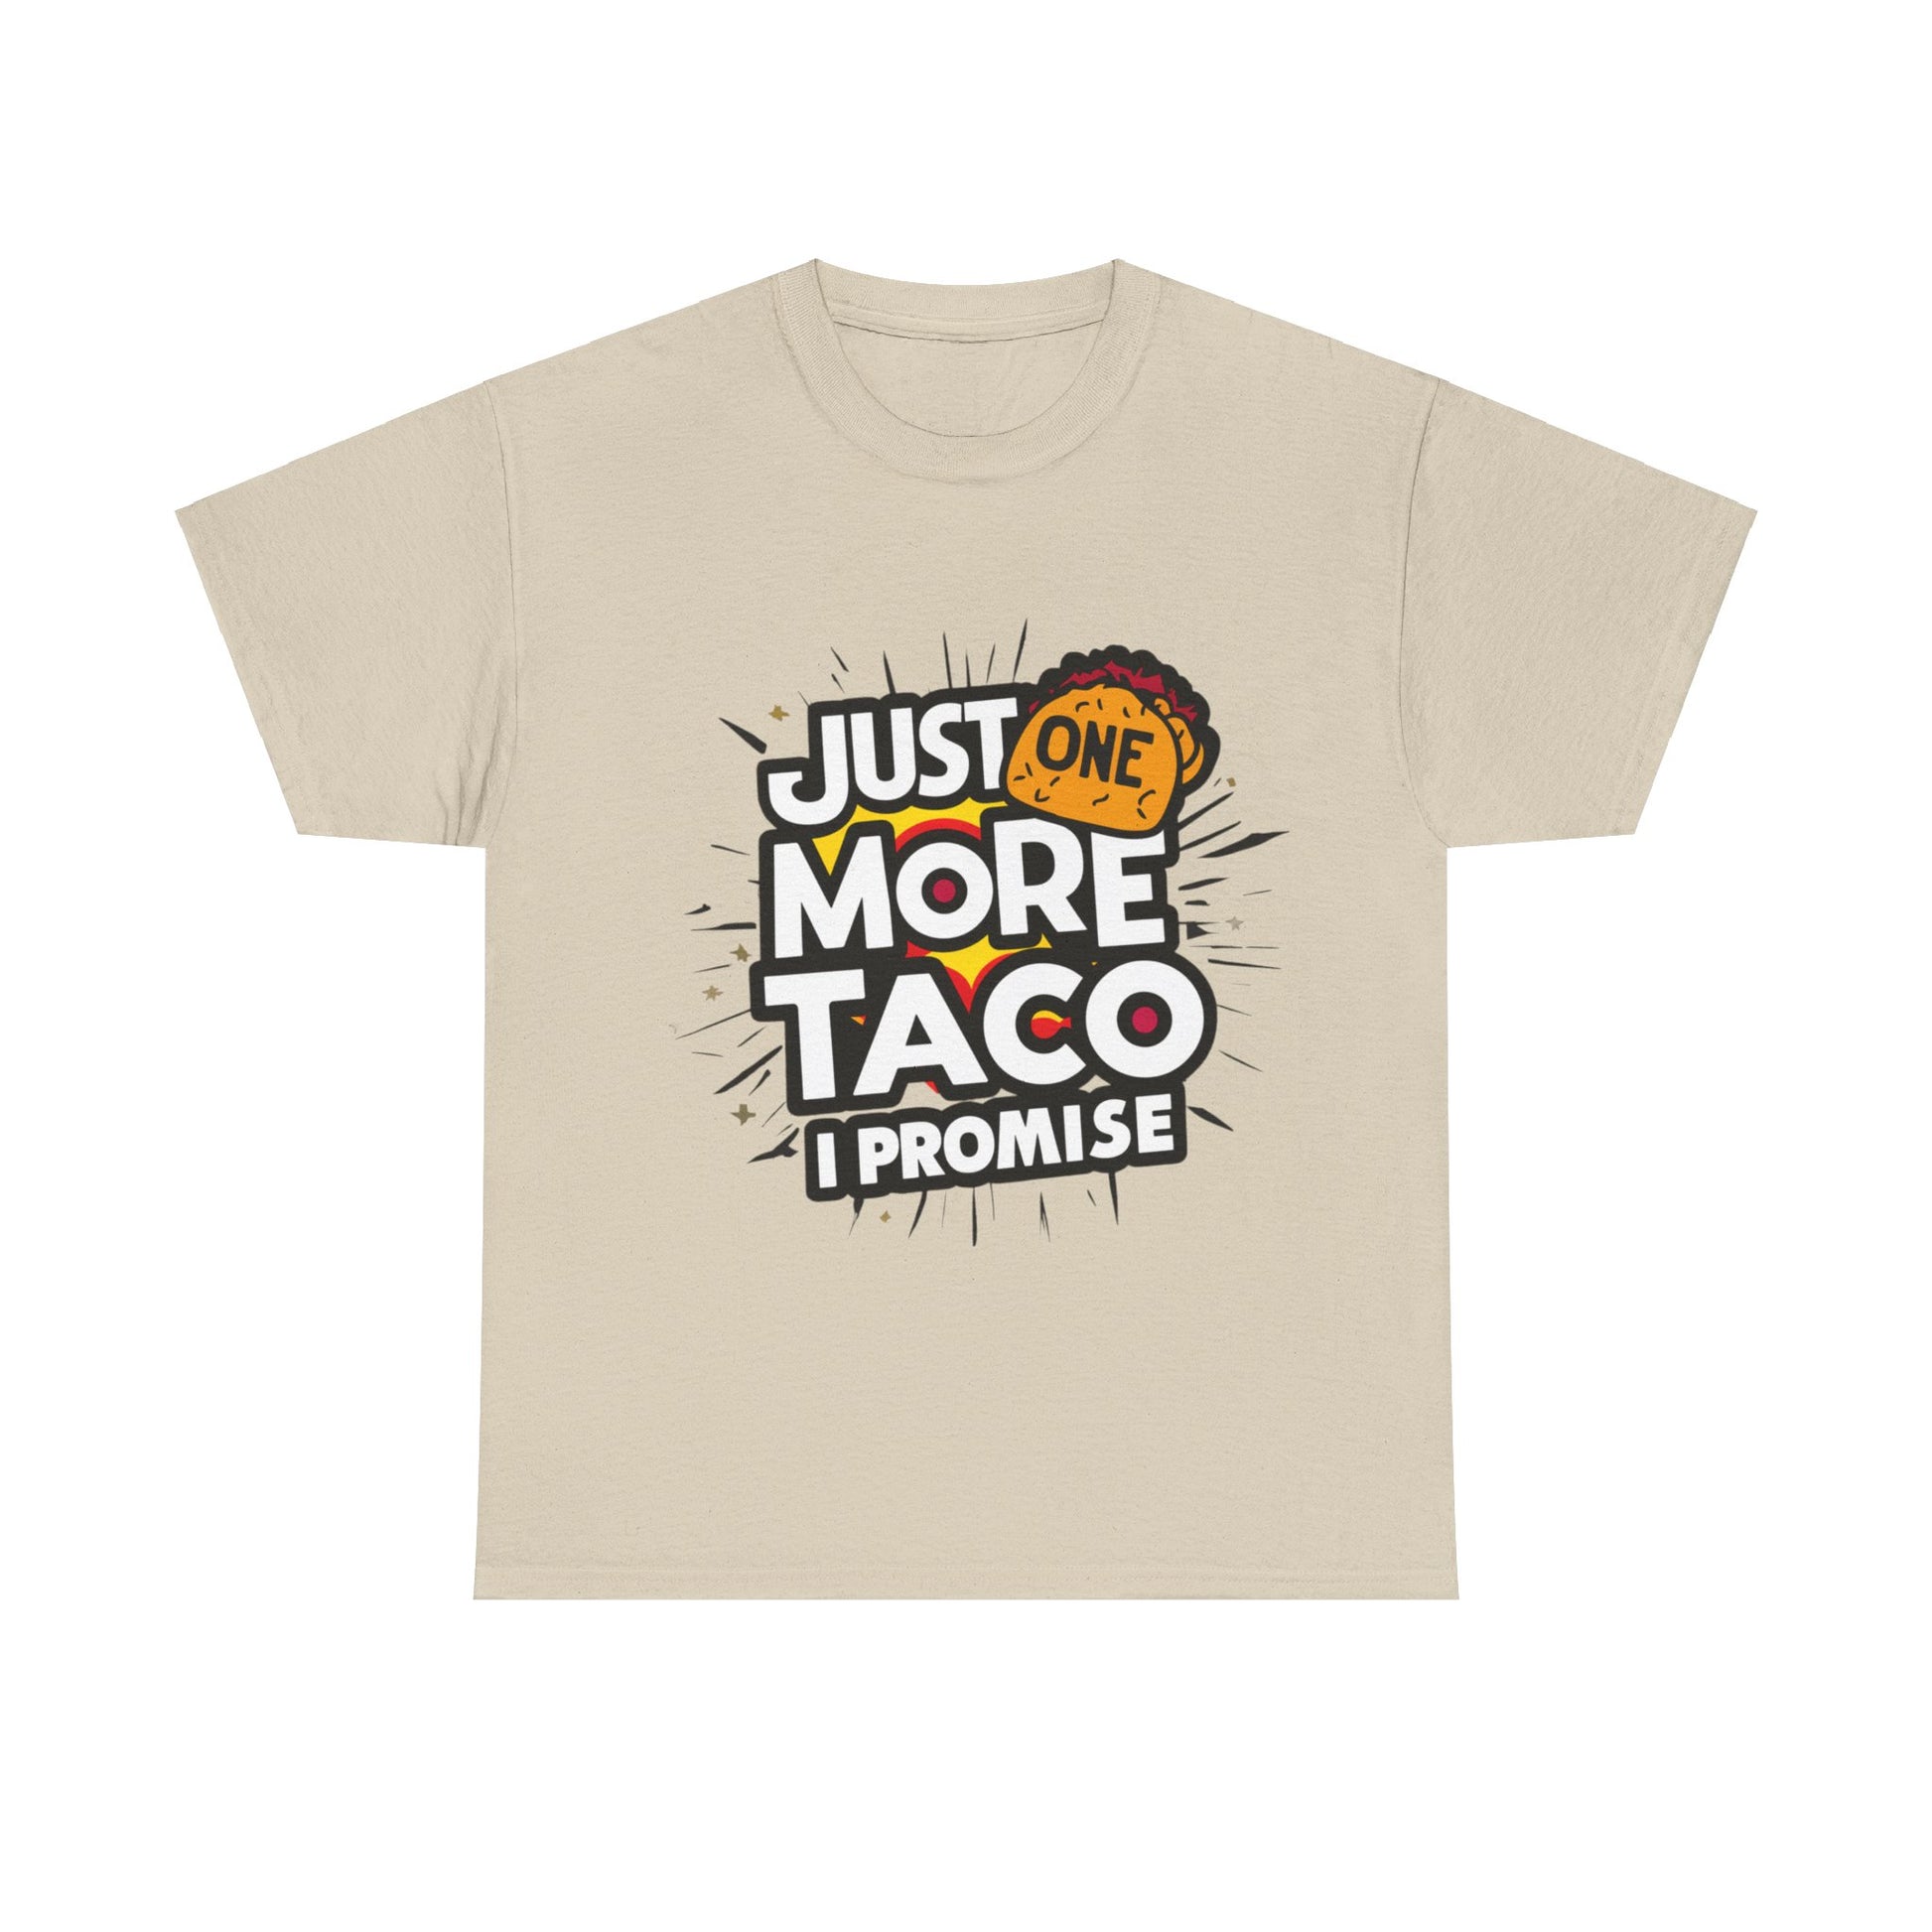 Copy of Just One More Taco I Promise Mexican Food Graphic Unisex Heavy Cotton Tee Cotton Funny Humorous Graphic Soft Premium Unisex Men Women Sand T-shirt Birthday Gift-8